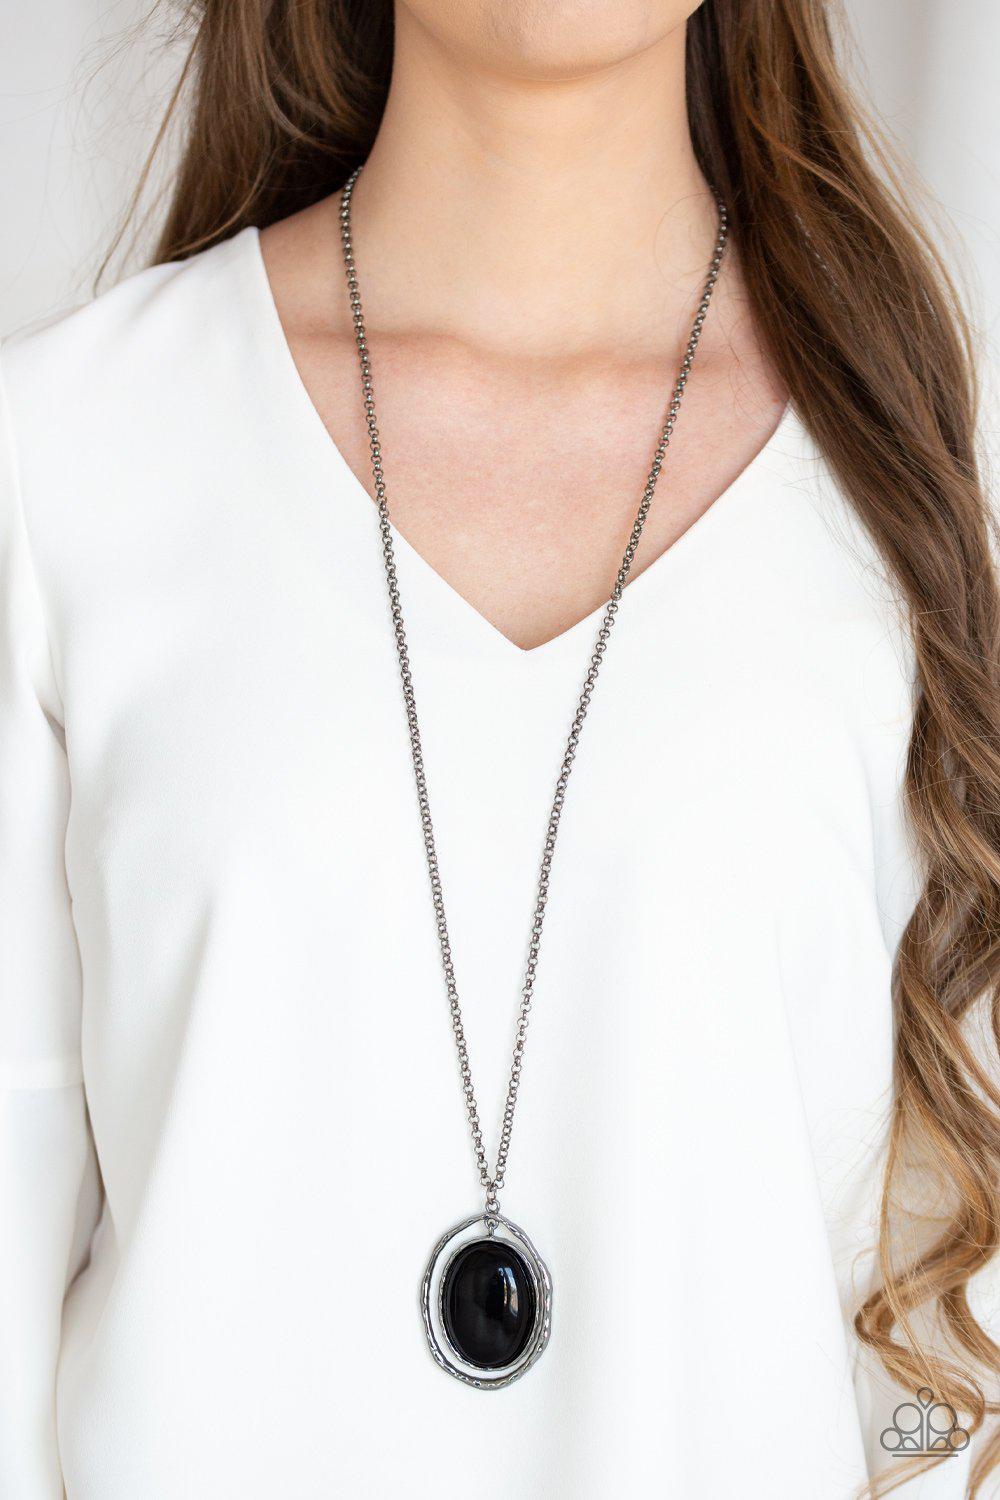 Harbor Harmony Black and Gunmetal Necklace - Paparazzi Accessories-CarasShop.com - $5 Jewelry by Cara Jewels